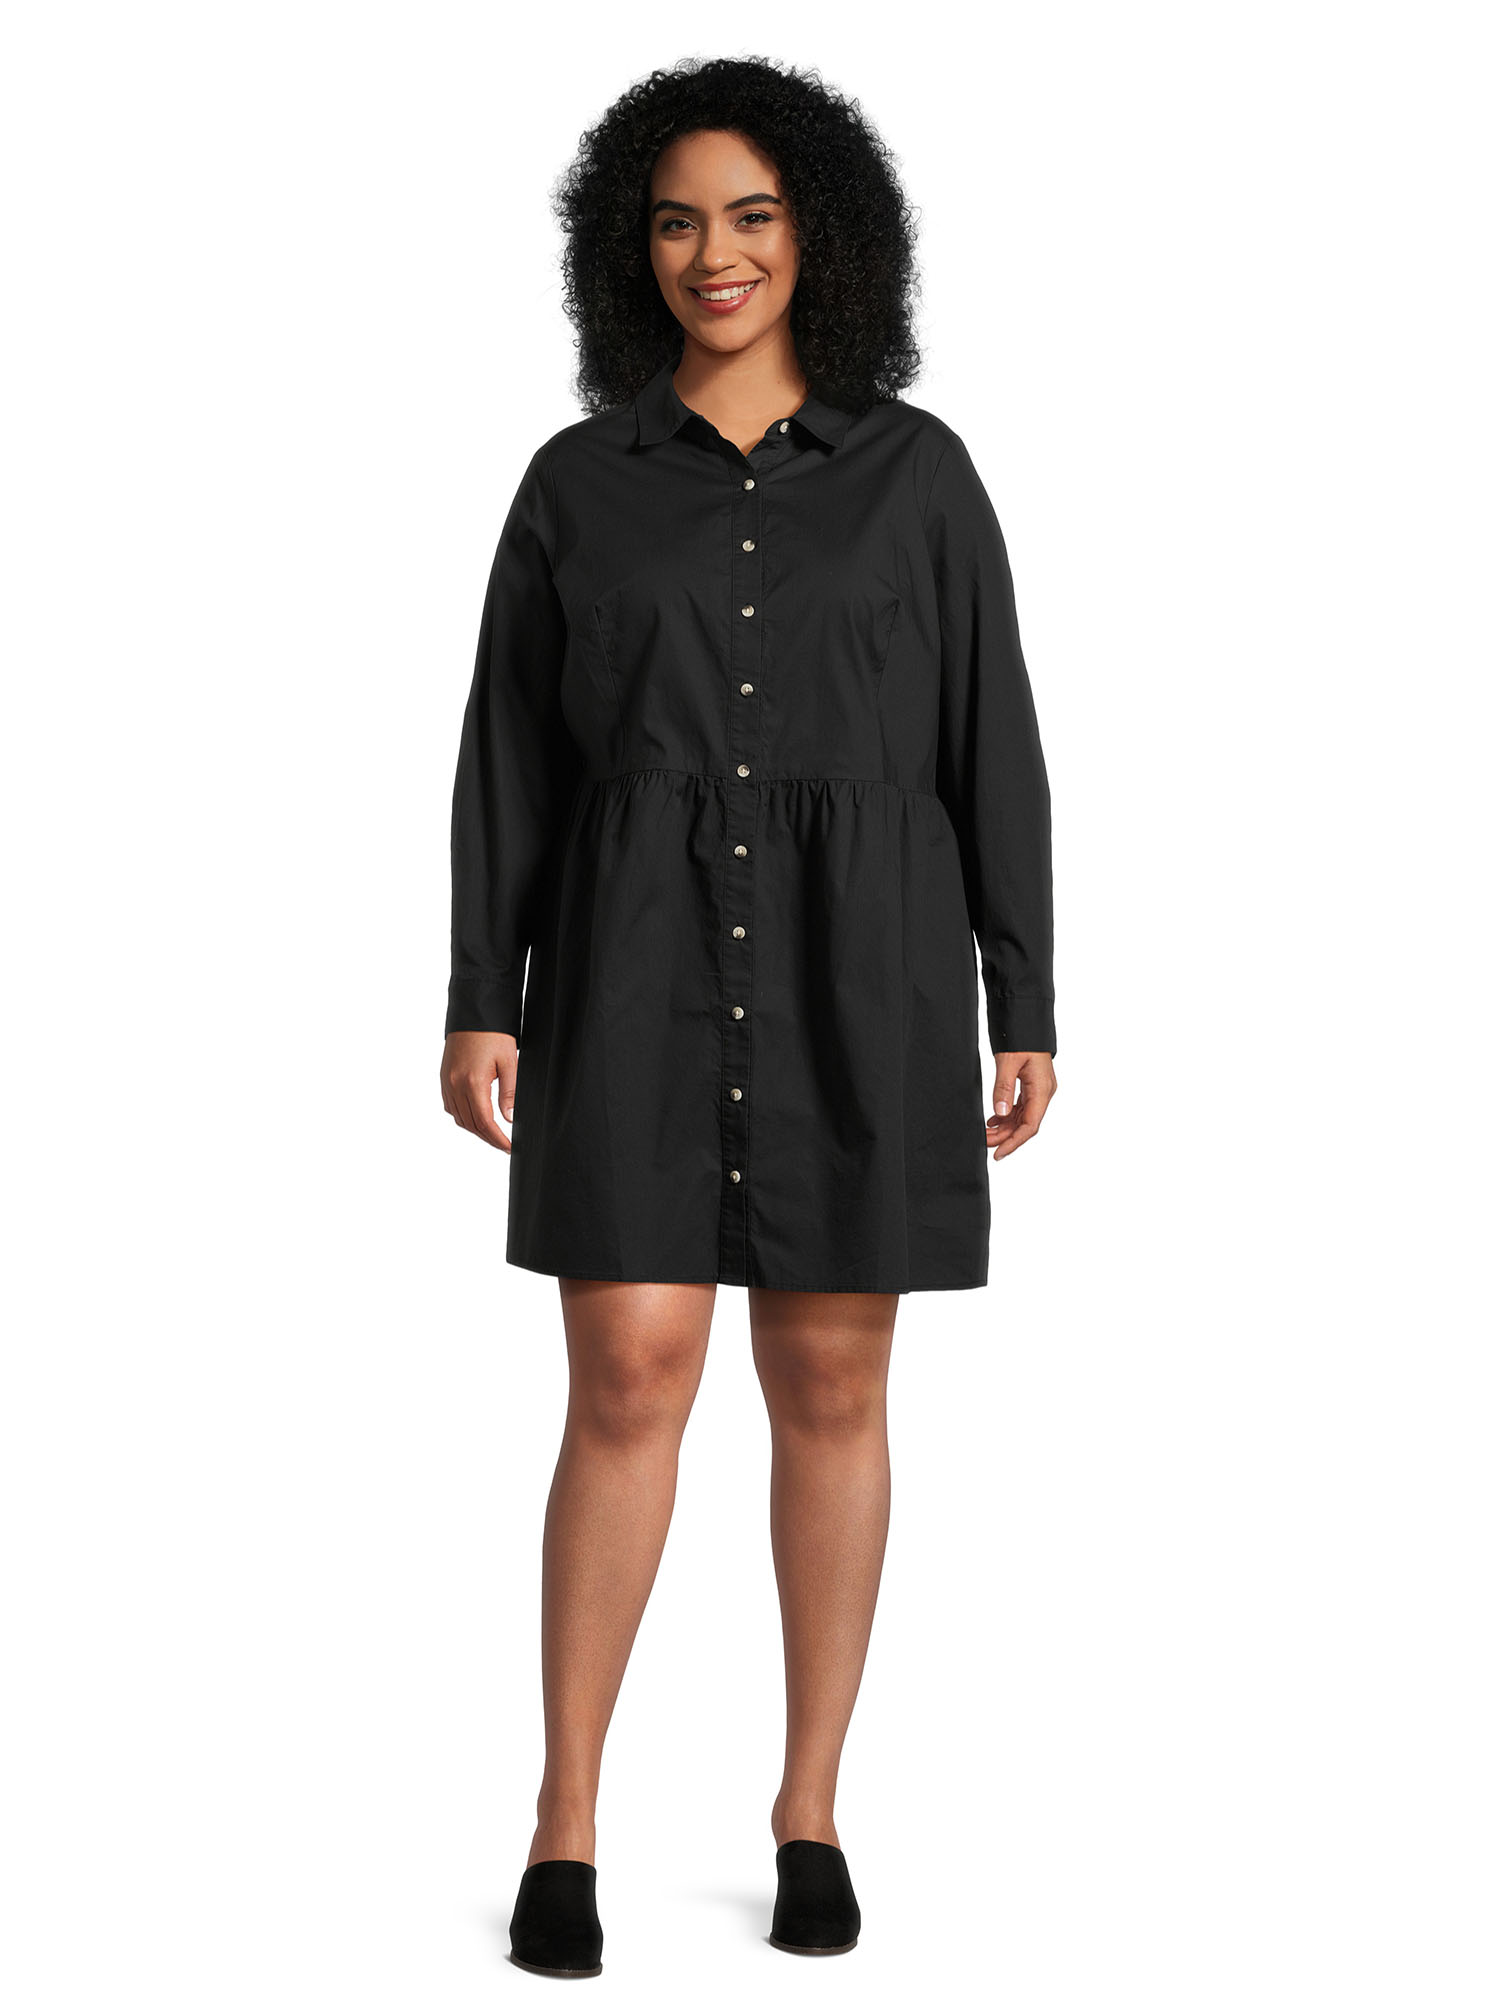 Nine.Eight Women's Plus Size Mini Shirtdress with Long Sleeves - image 3 of 6